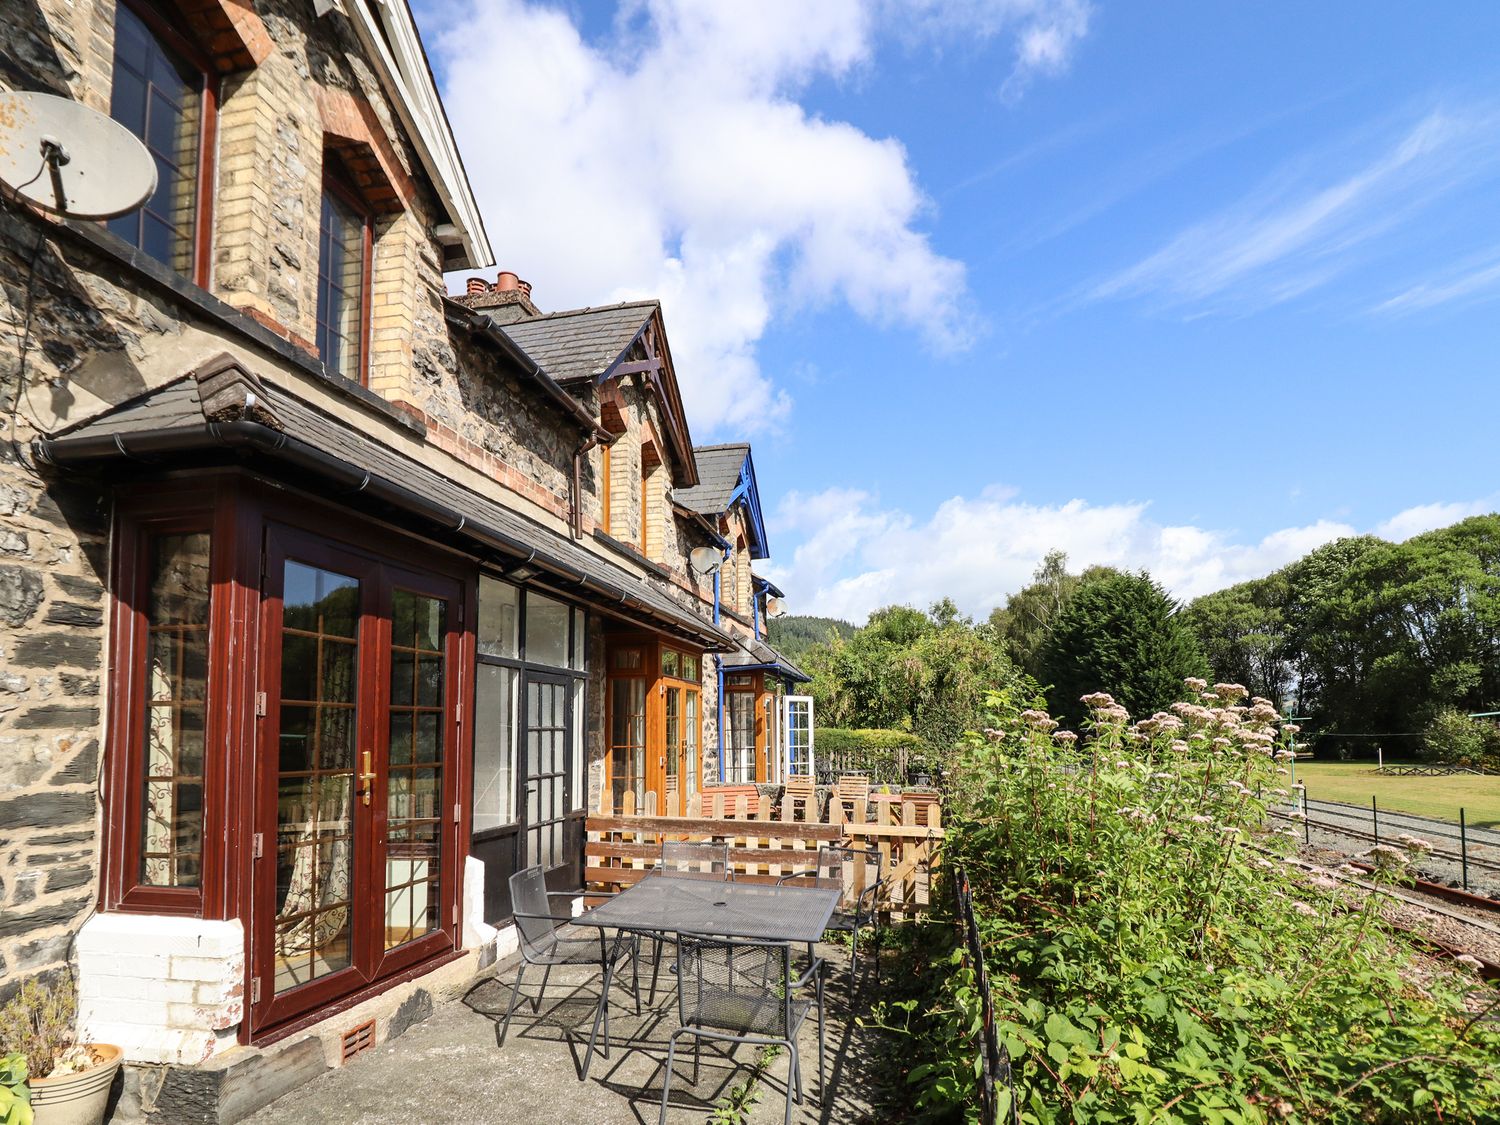 3 Railway Cottages - North Wales - 12543 - photo 1